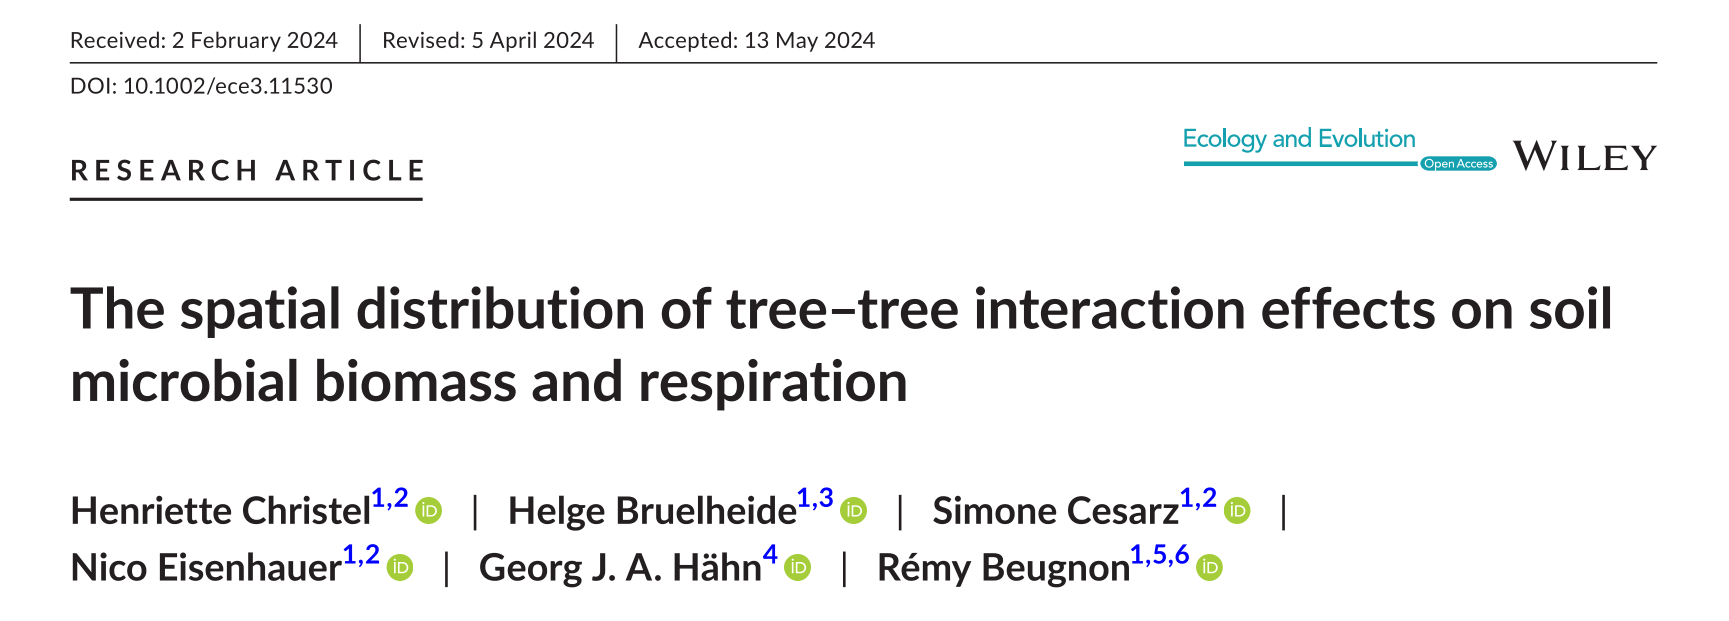 The spatial distribution of tree-tree interaction effects on soil microbial biomass and respiration